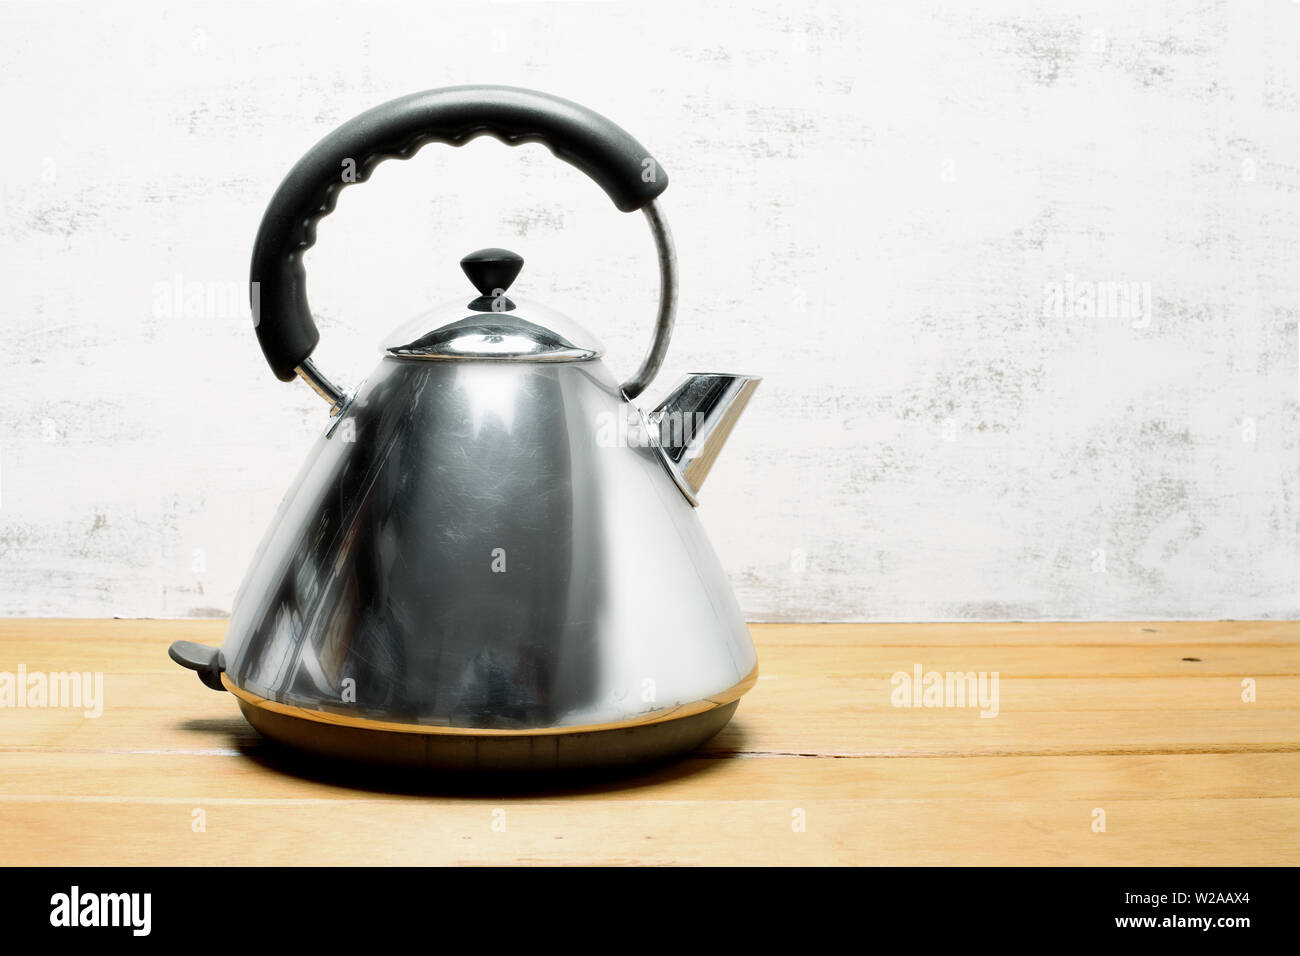 Retro Electric Kettle on Wooden Background Stock Photo